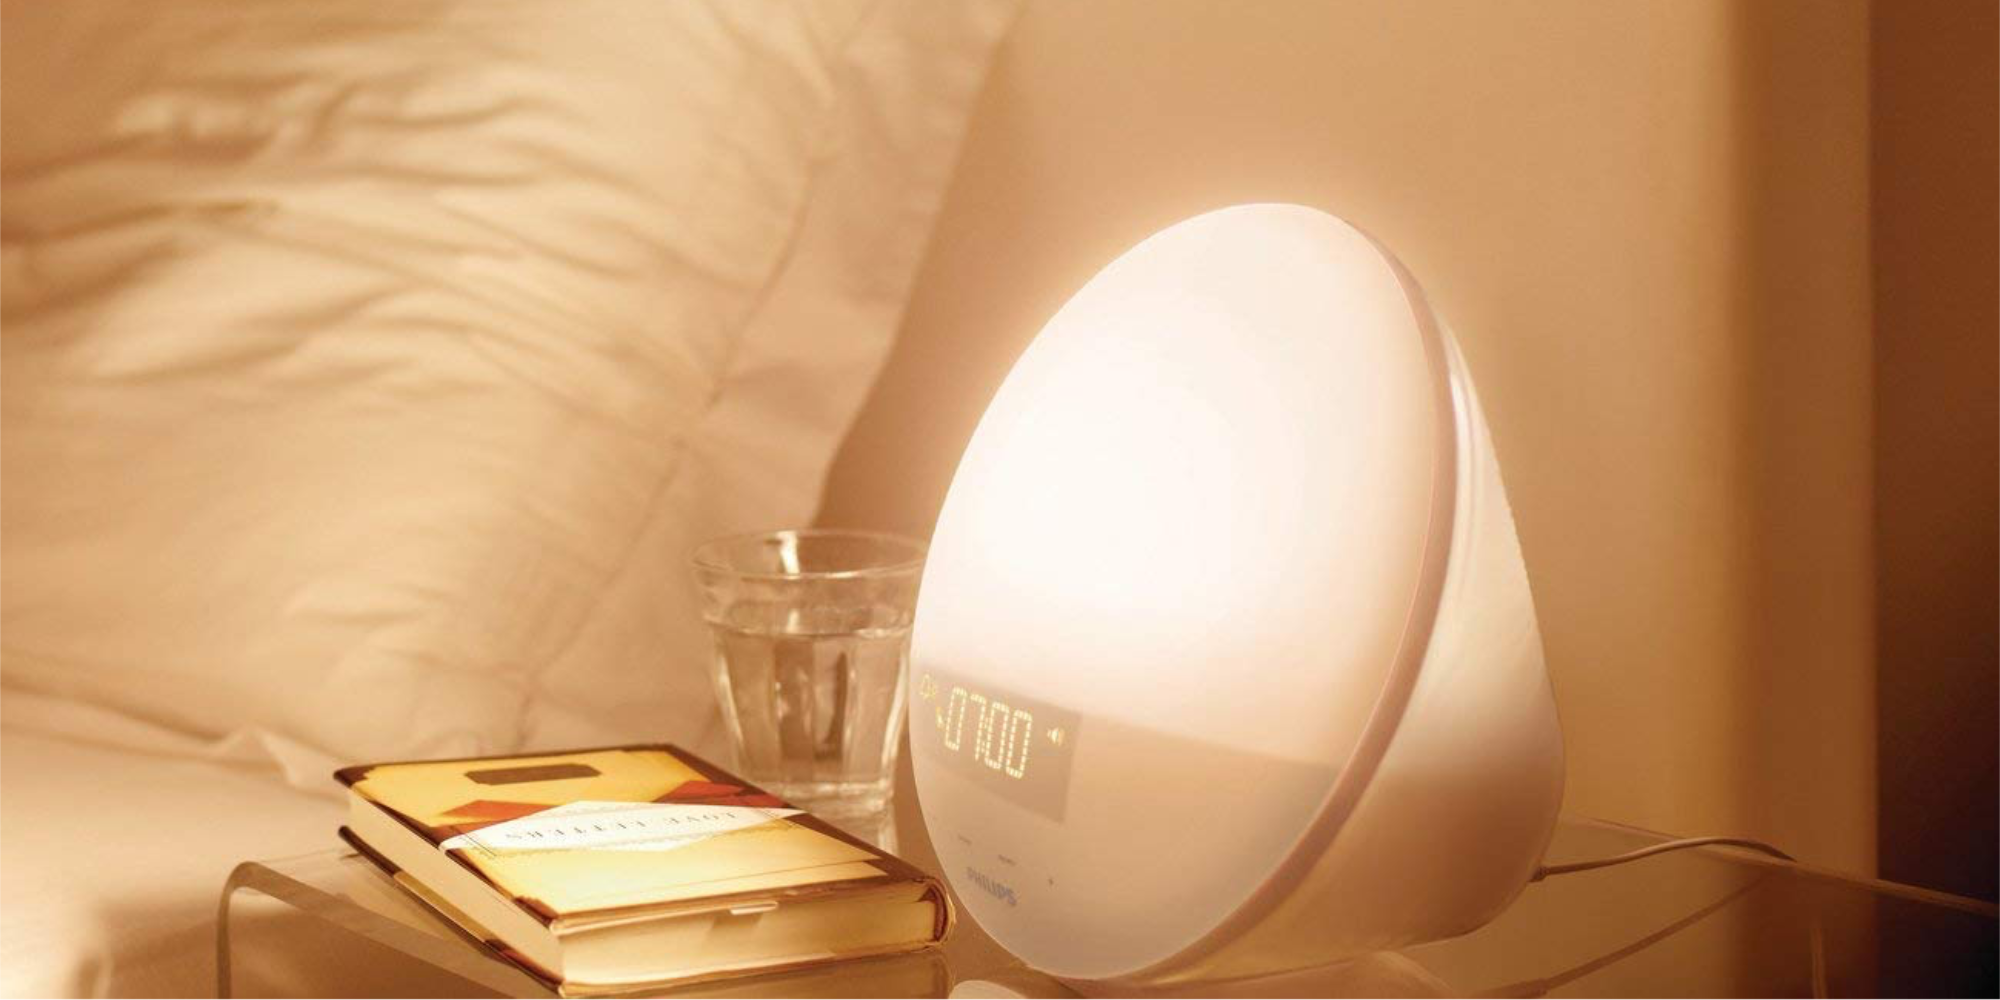 Add a Light to your morning from $37.50